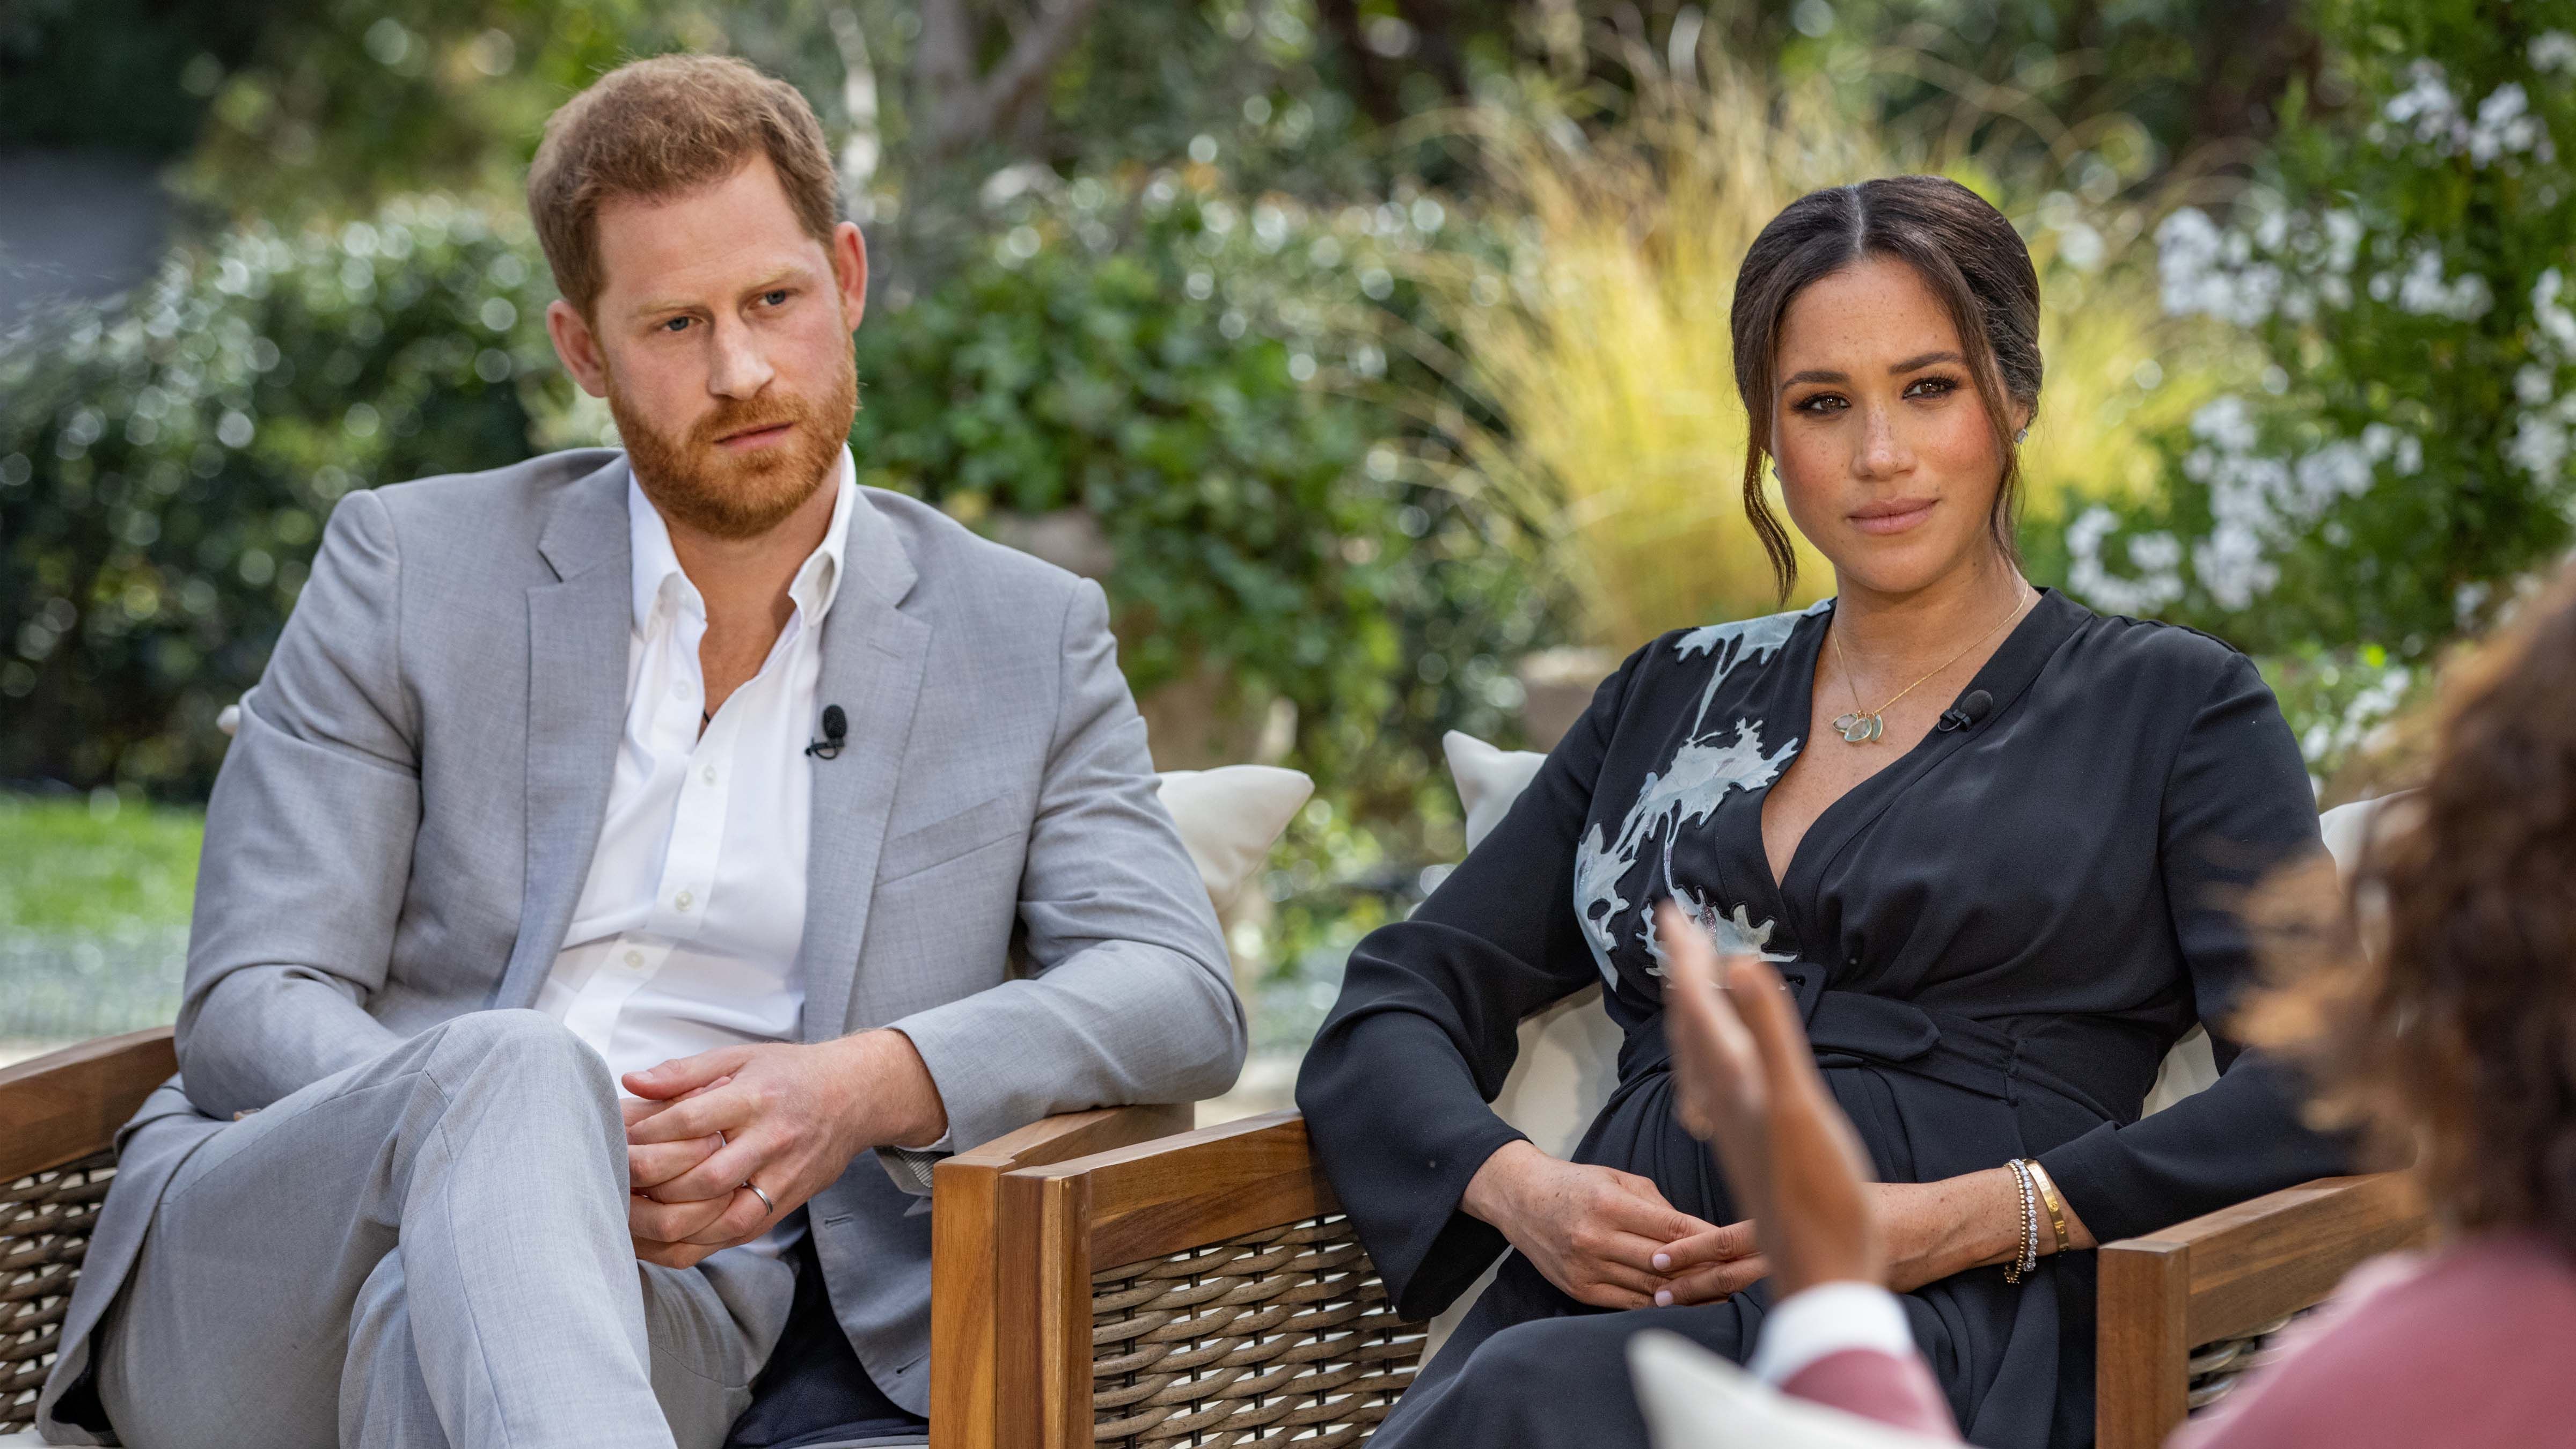 ‘Proud to have had a nice warmth with the matriarch of the family’, says Meghan Markle